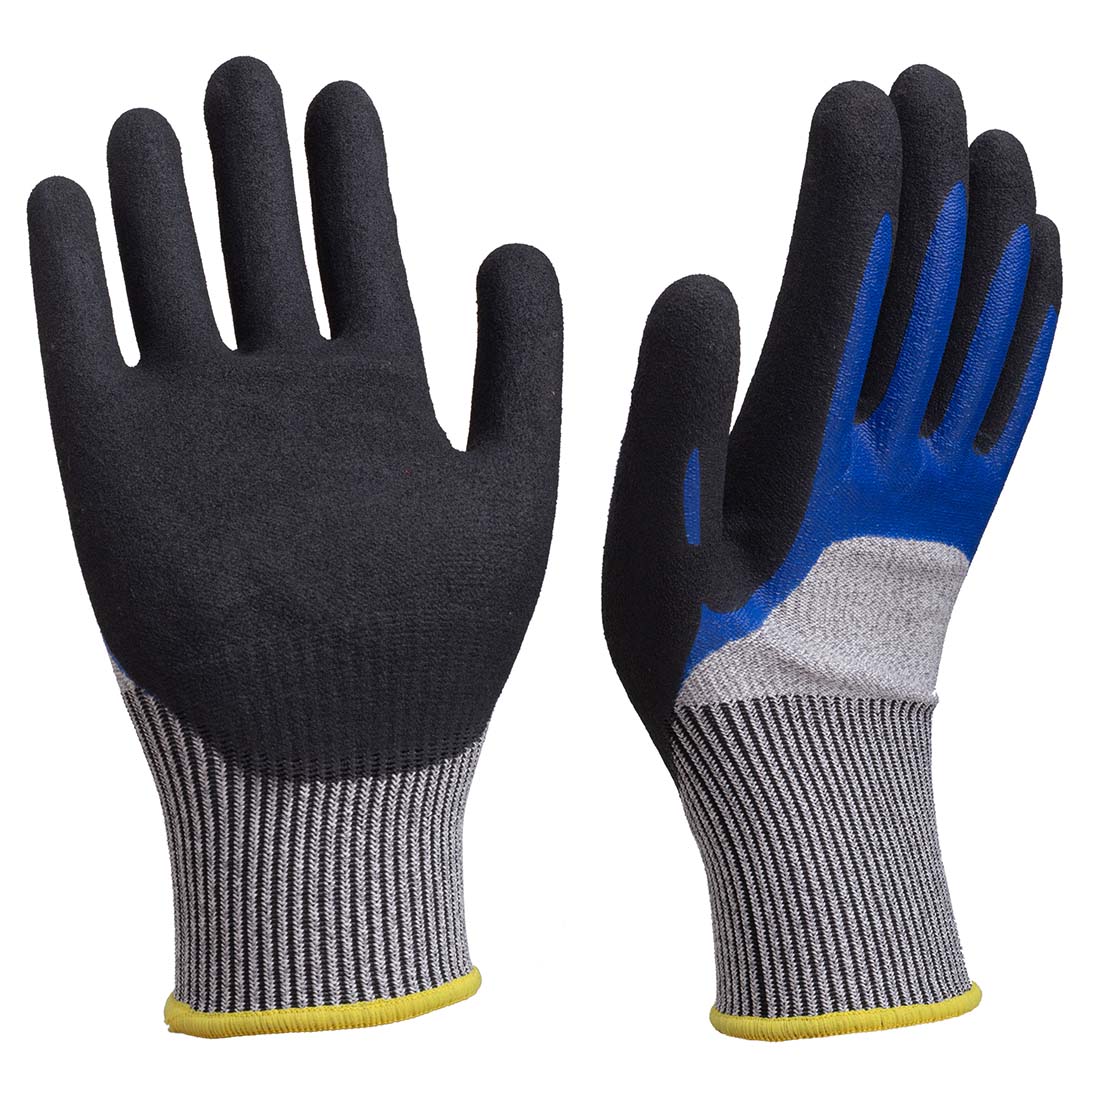 13G A4 cut resistant glove double layer sandy nitrile coated